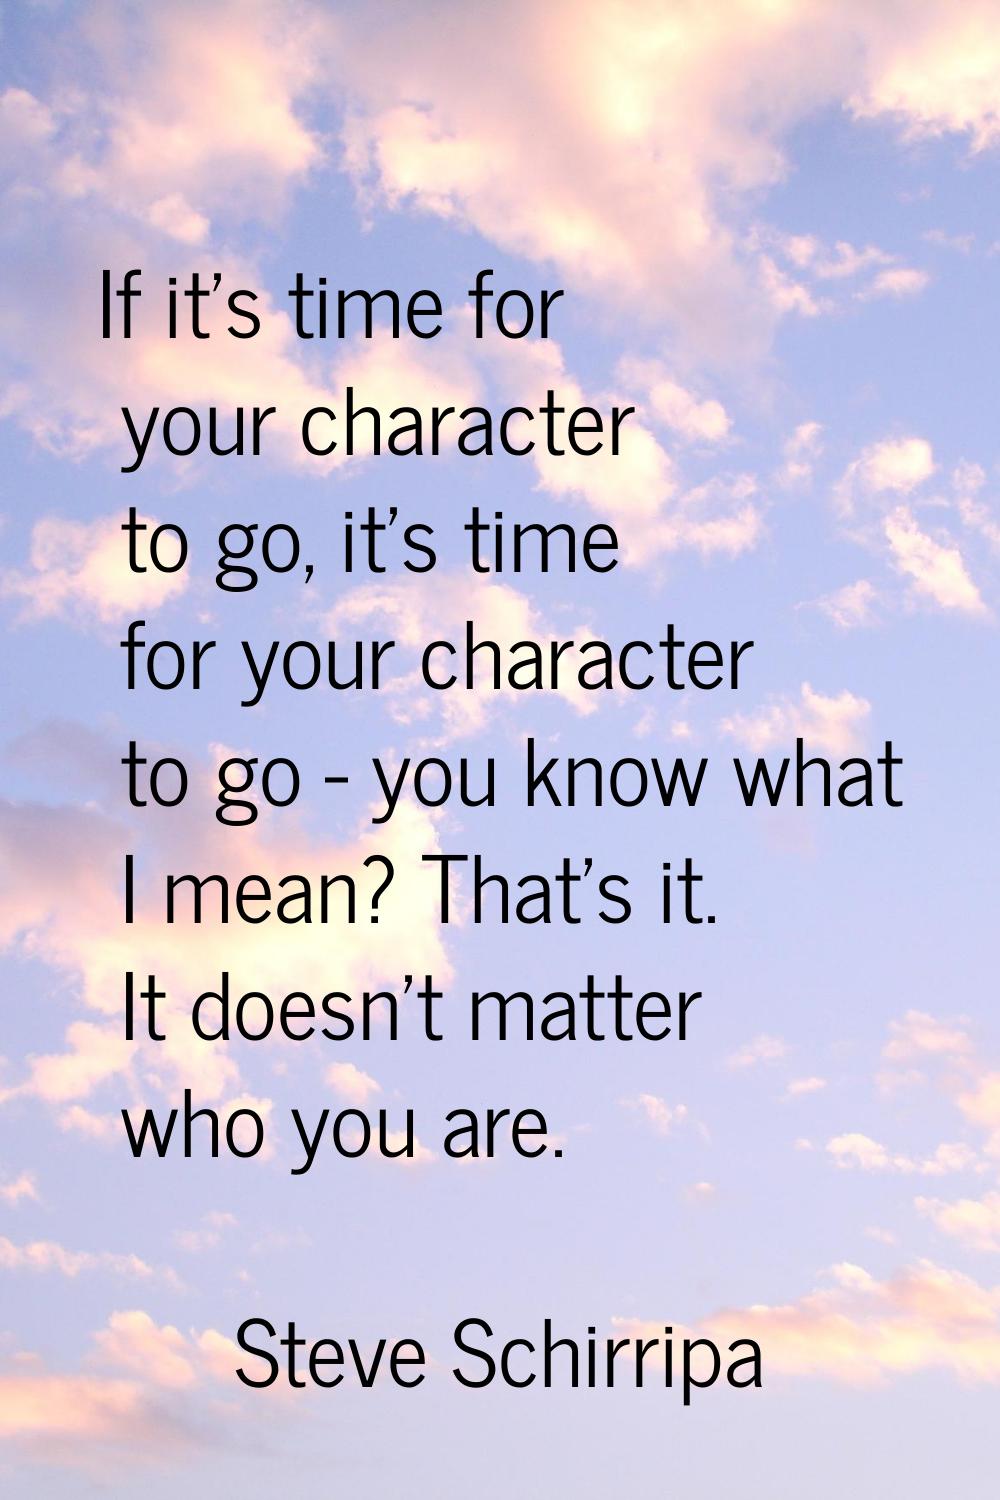 If it's time for your character to go, it's time for your character to go - you know what I mean? T